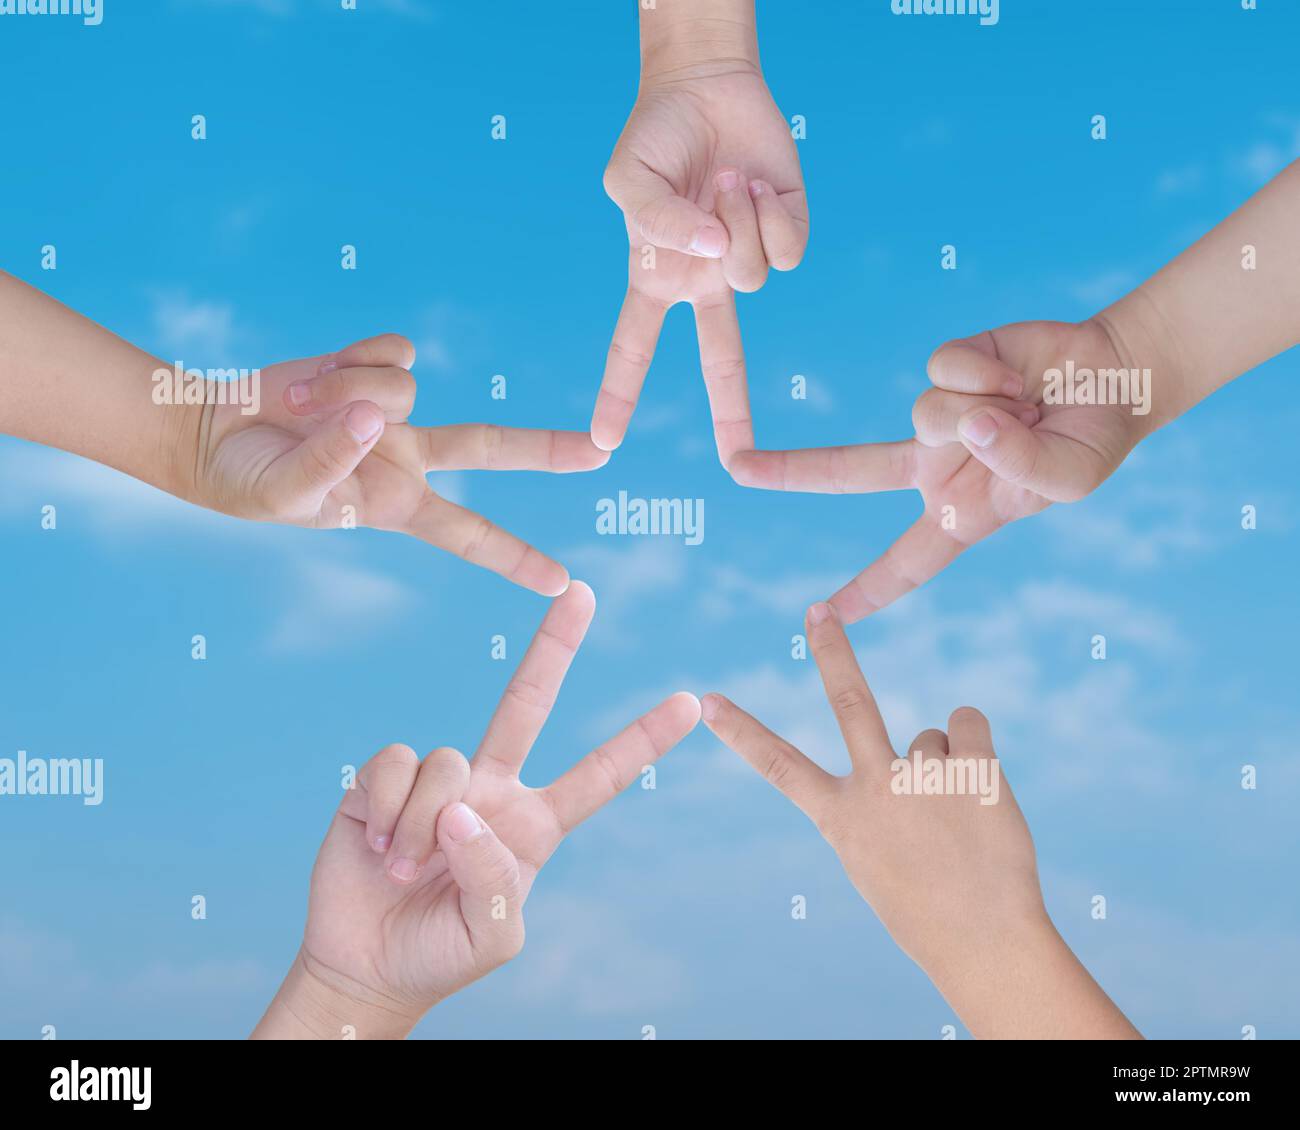 Child hands uniting their to make star shape with fingers, over blue sky background. Conceptual of teamwork. Stock Photo